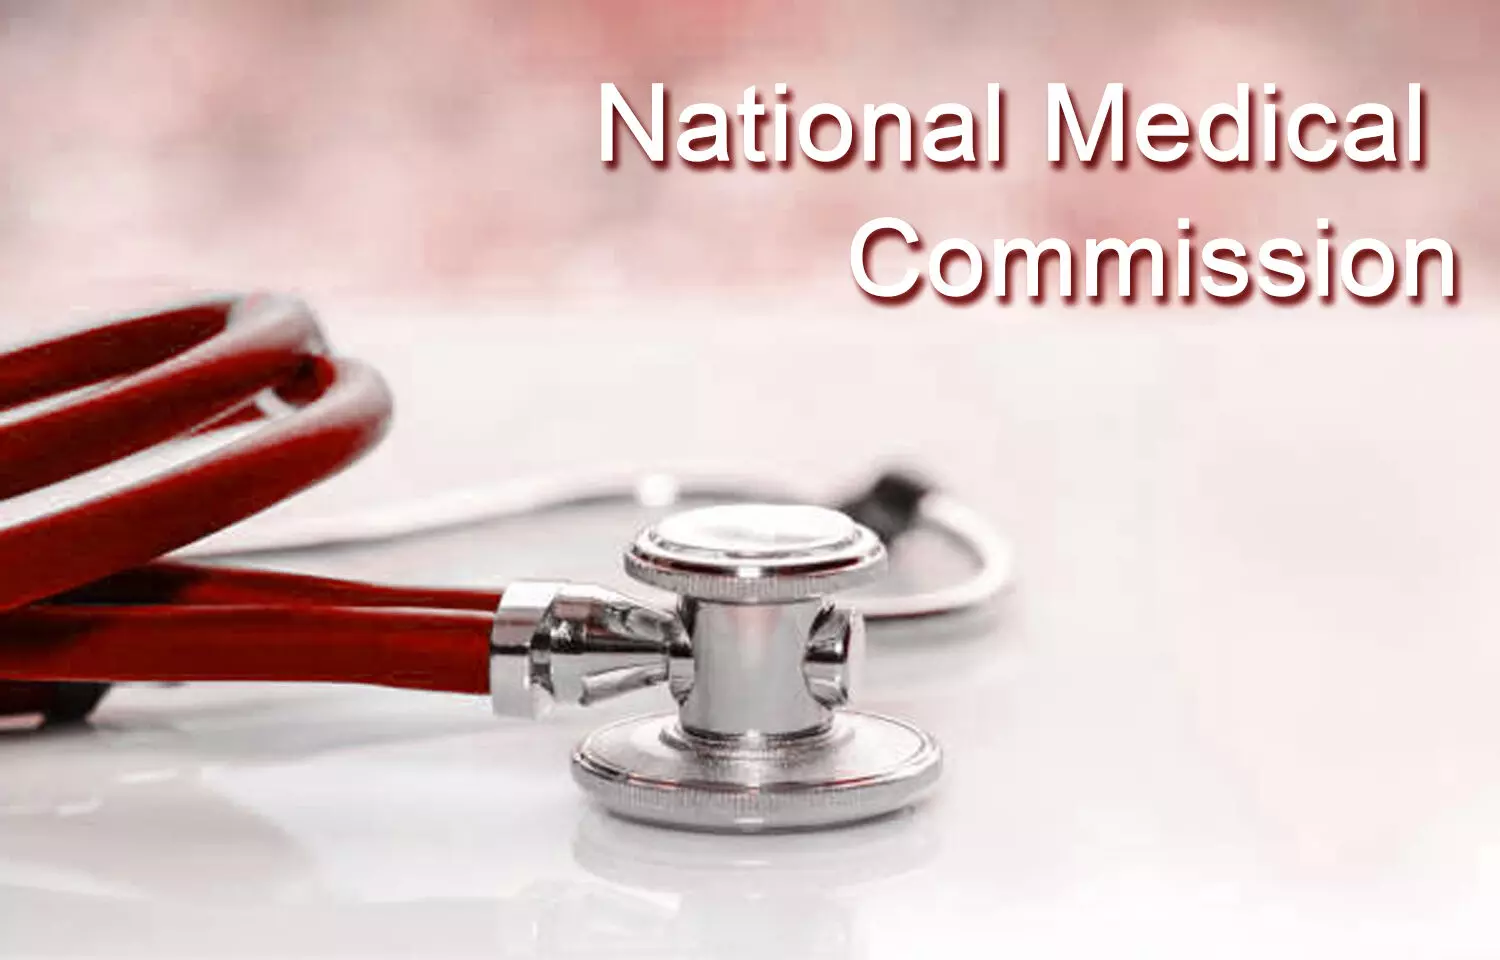 NMC issues draft guidelines for MBBS, PG fee fixation, invites comments